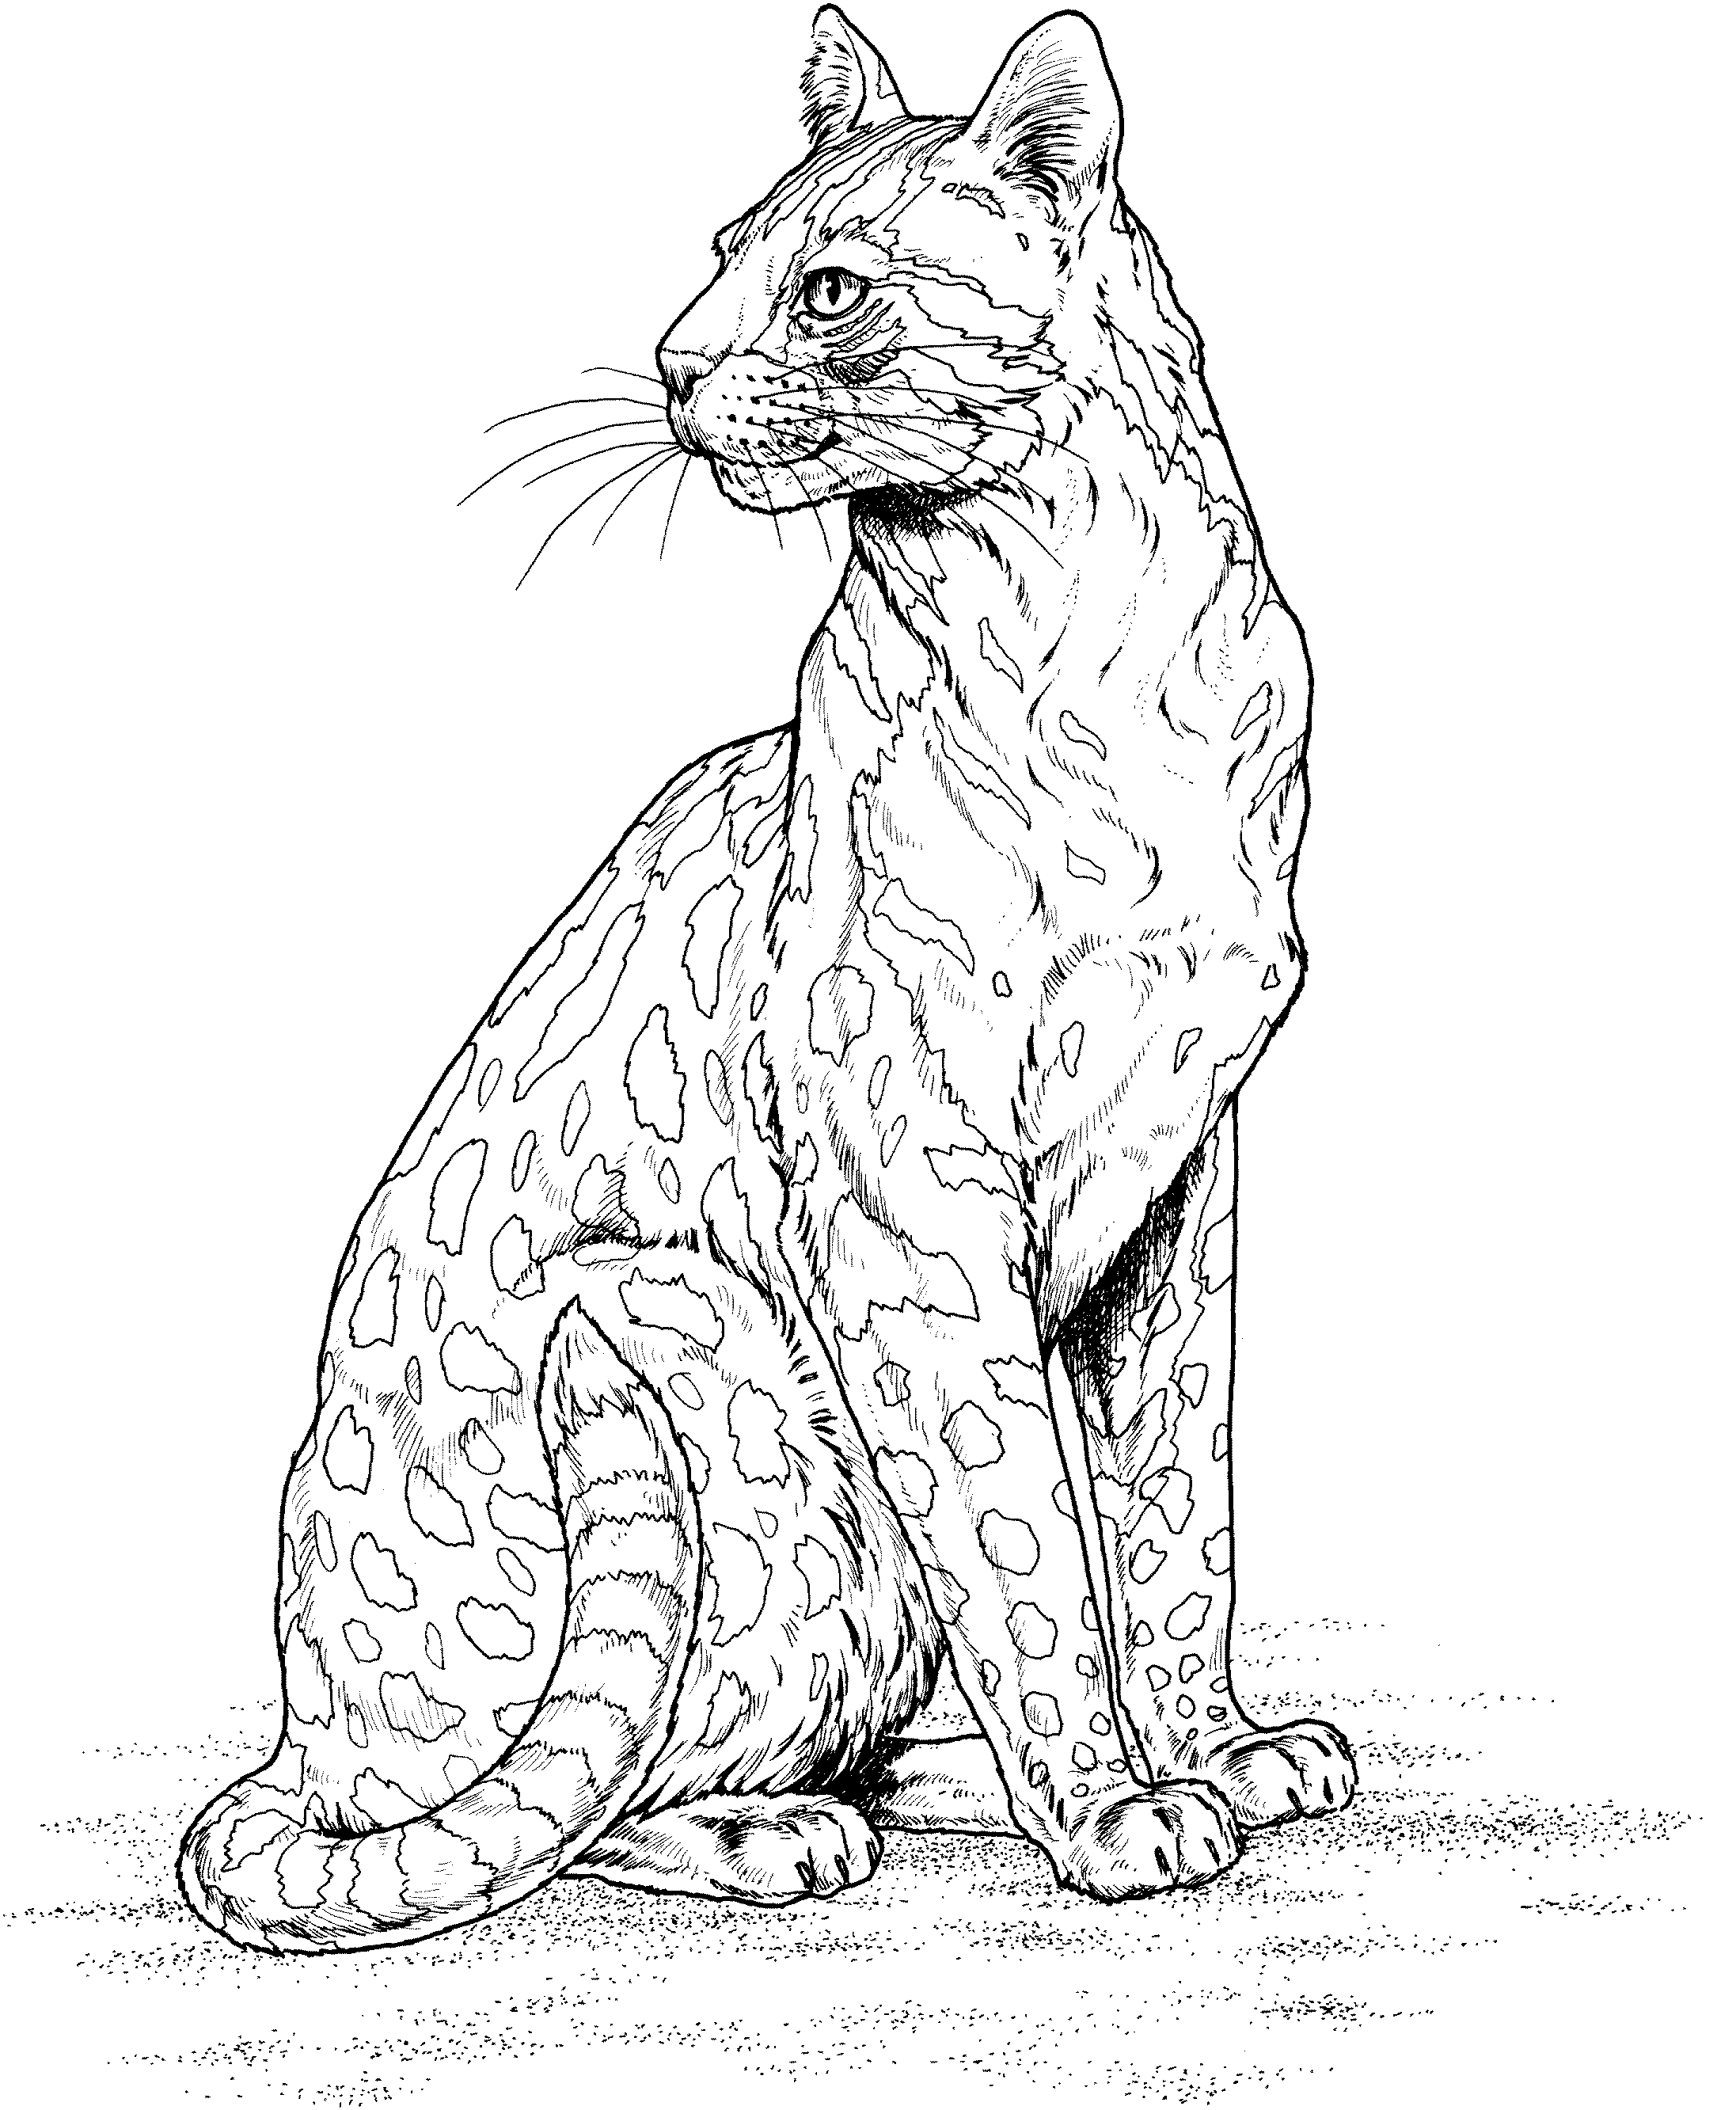 leopard pictures to color free leopard coloring pages pictures color leopard to 1 1